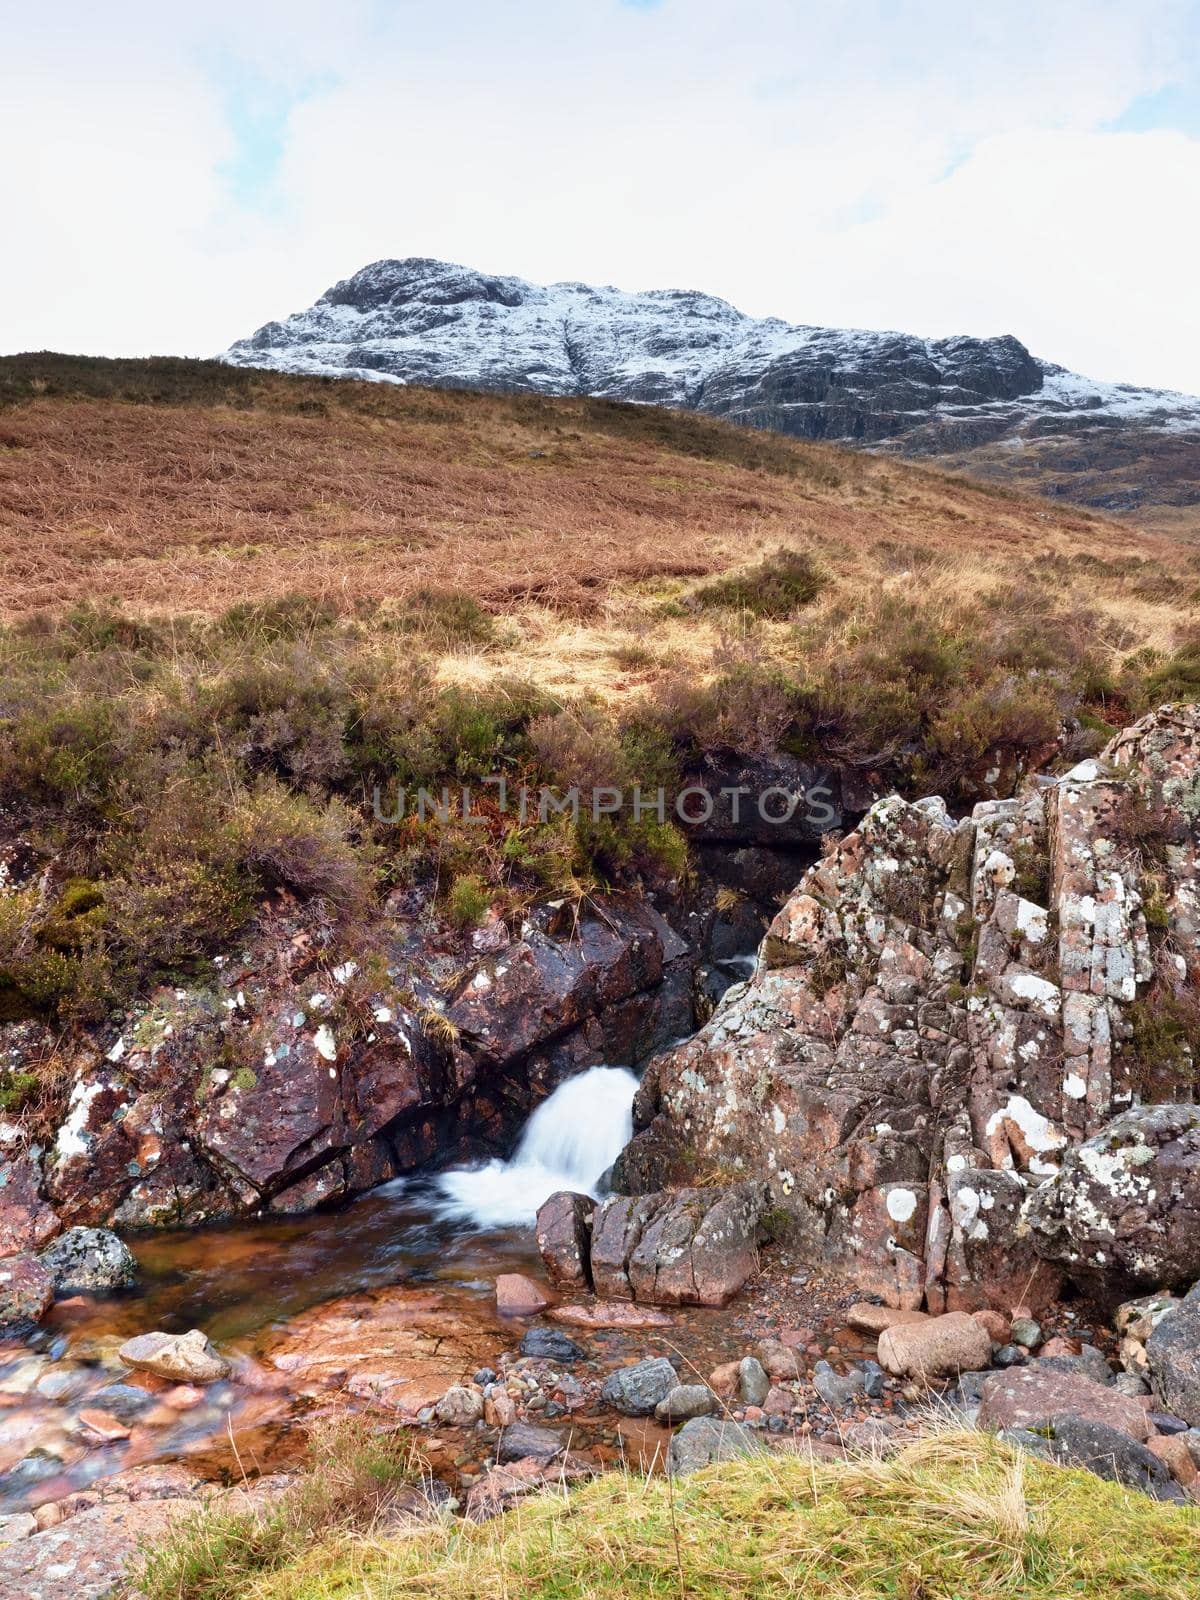 Rapids in small waterfall on stream, Higland in Scotland an early spring day. Snowy cone of mountain in clouds. Dry grass and heather bushes on banks